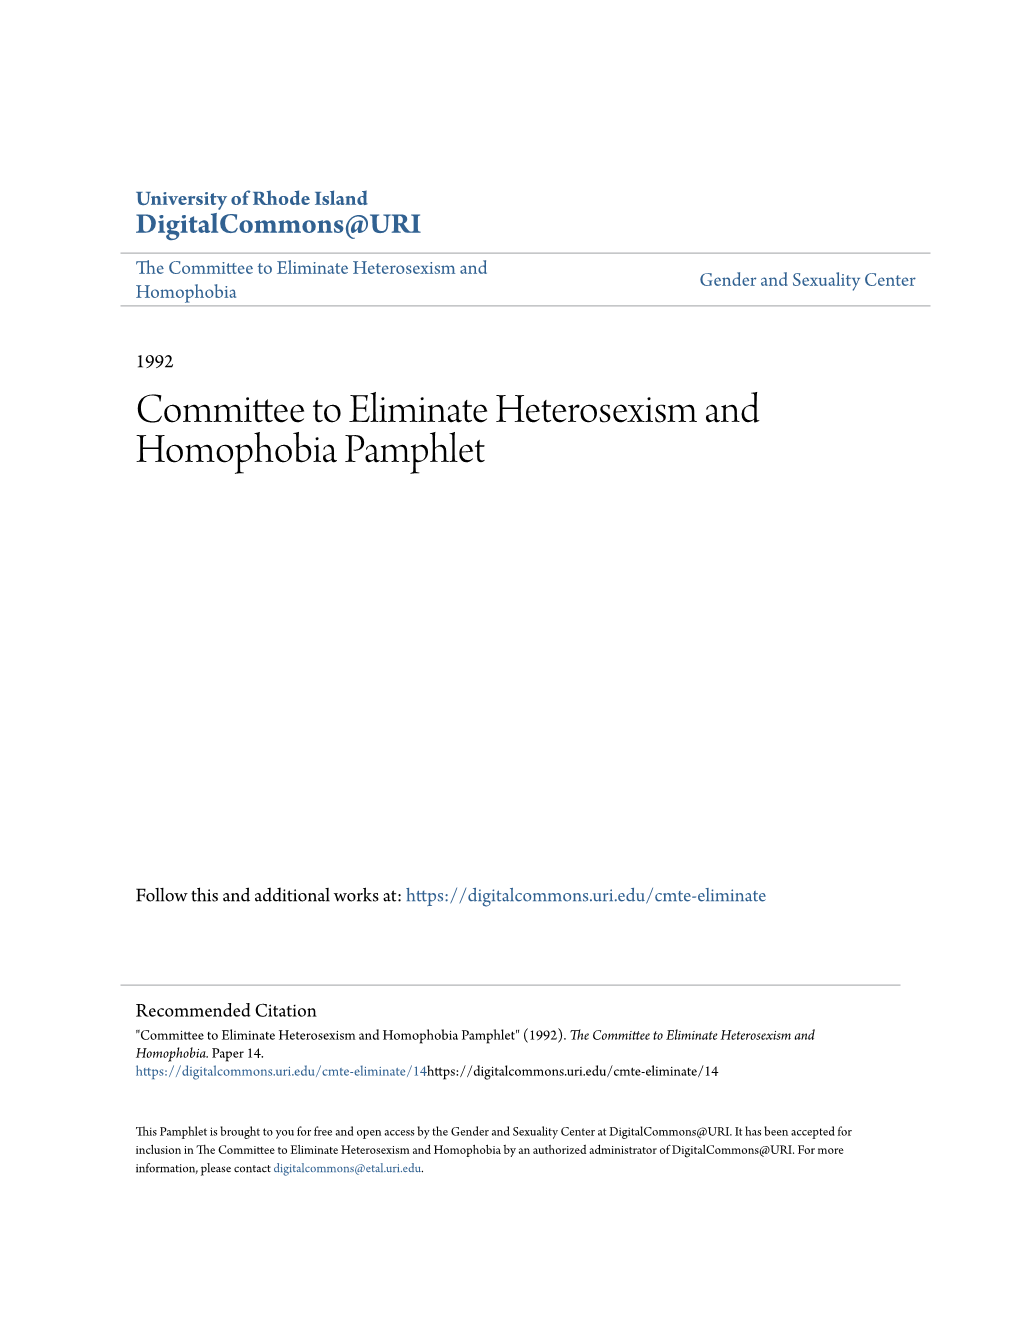 Committee to Eliminate Heterosexism and Homophobia Pamphlet